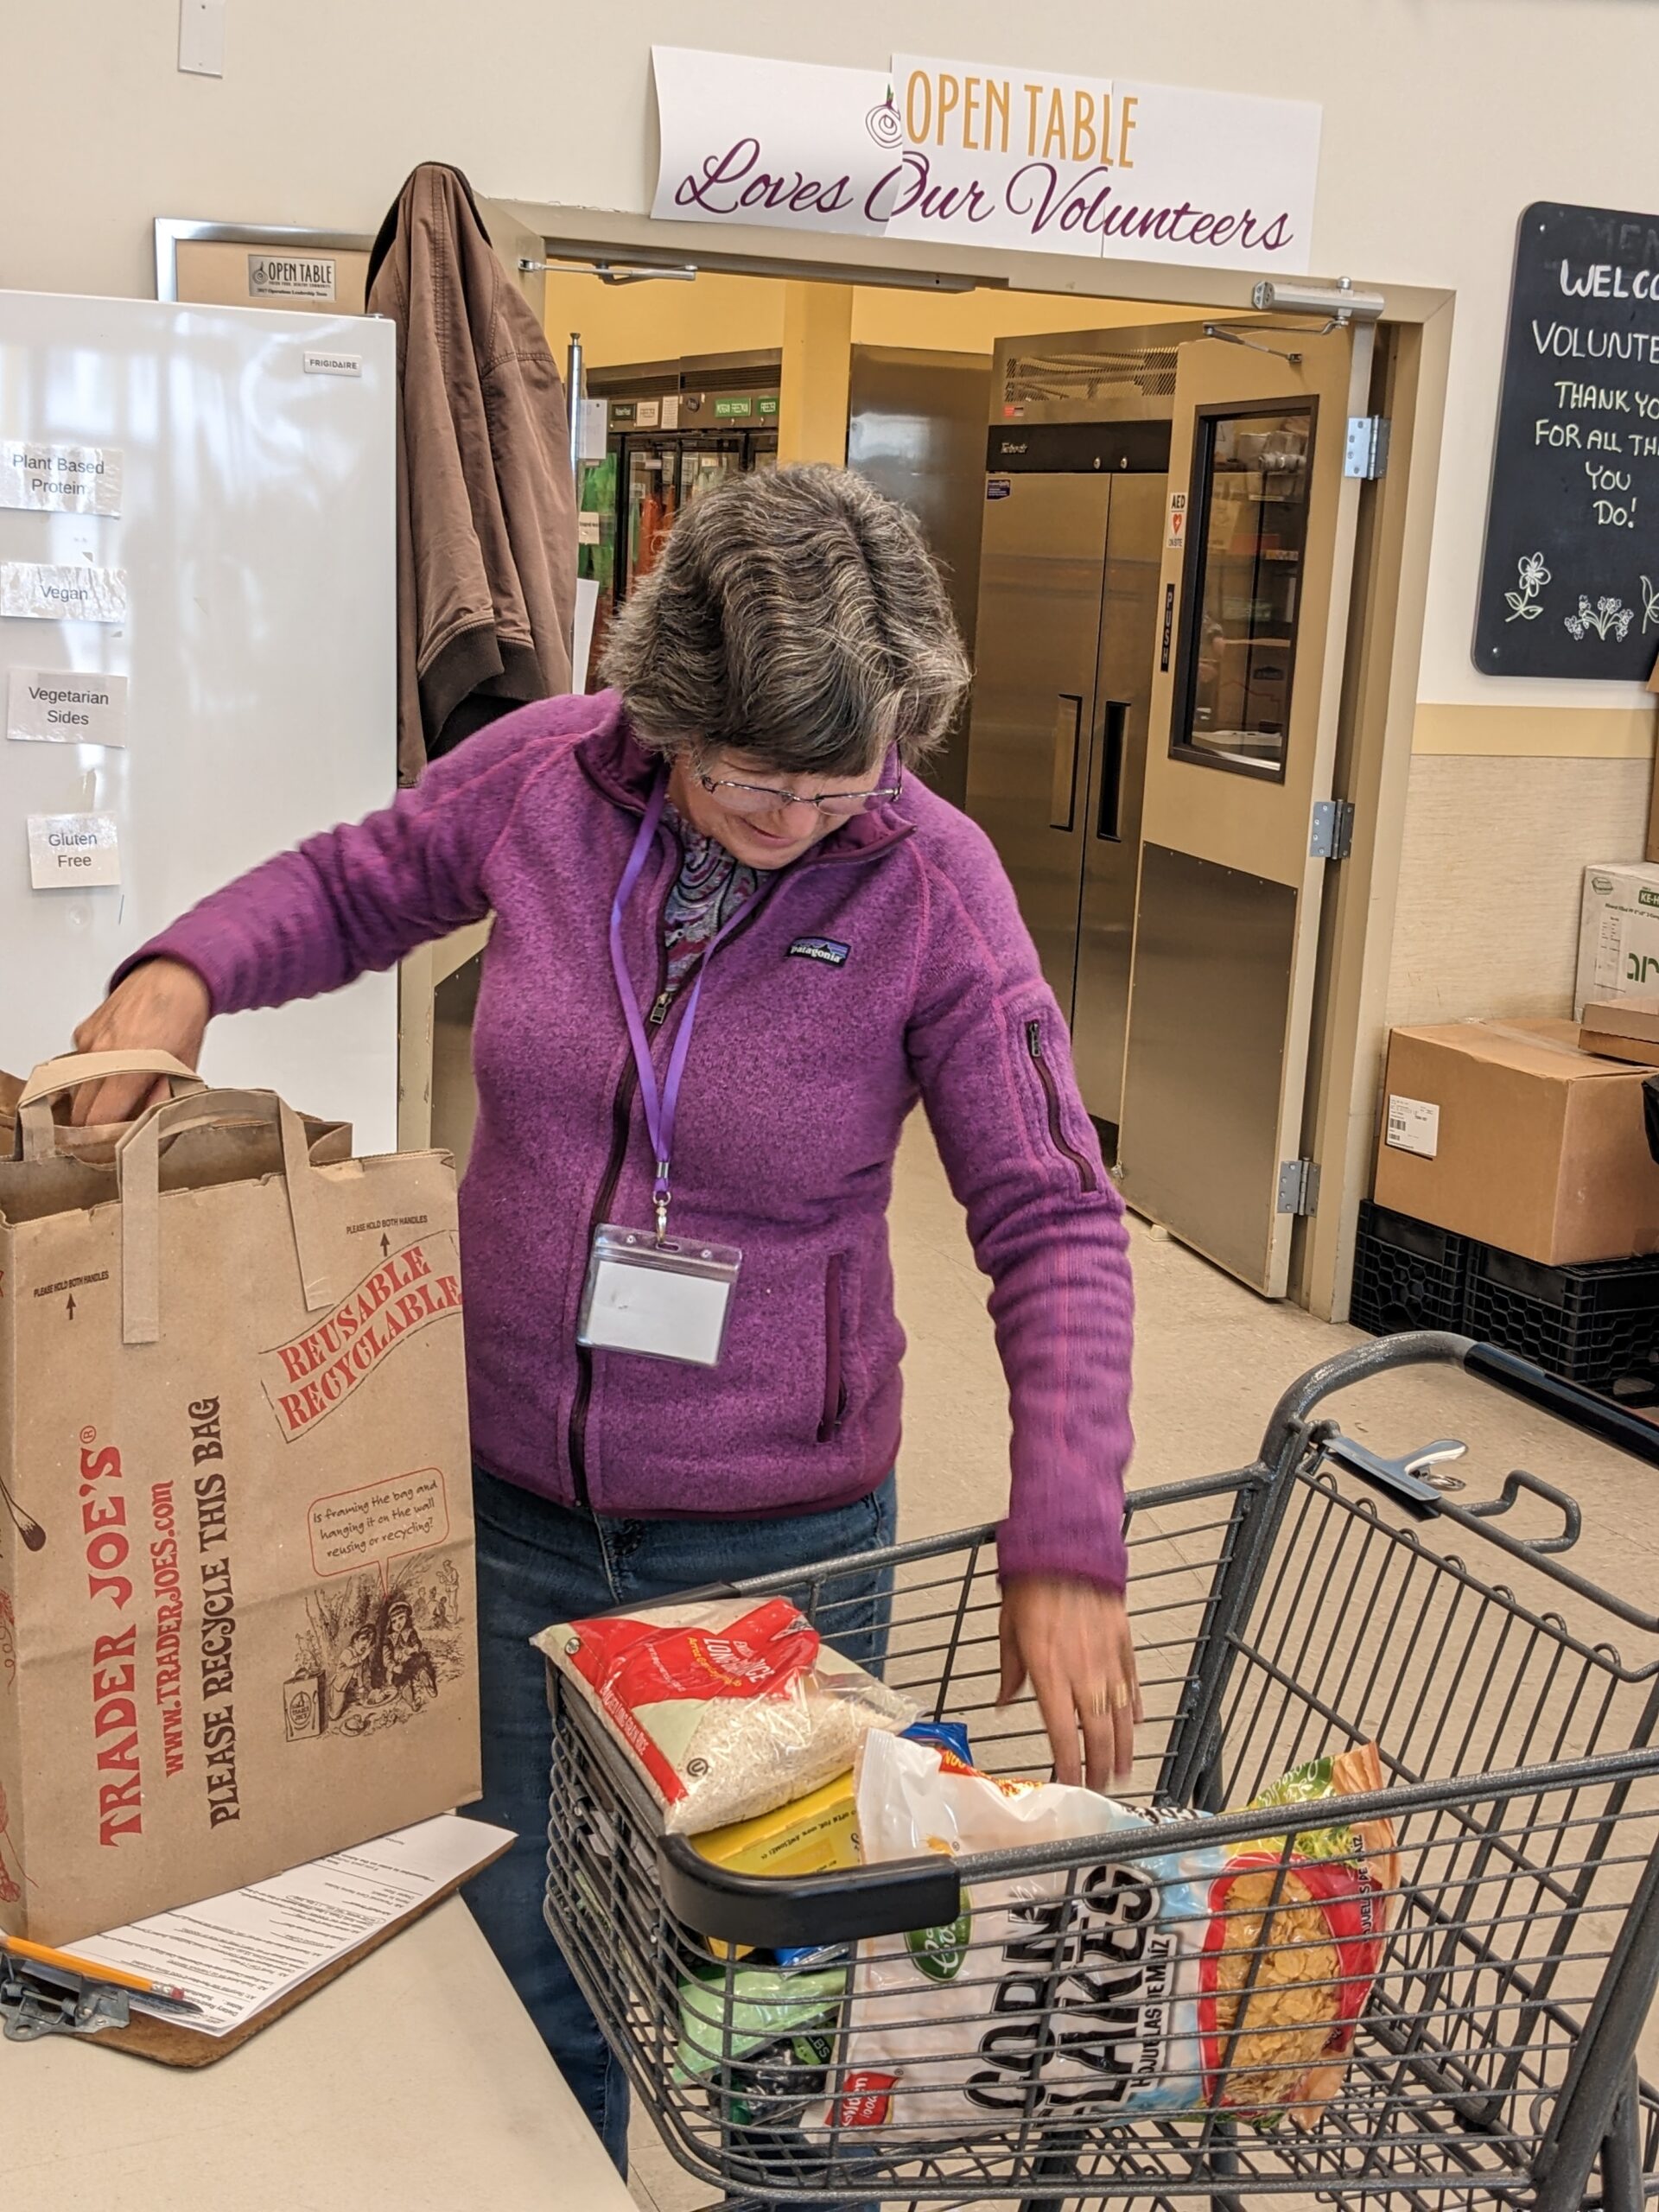 Volunteer packing groceries for Open Table